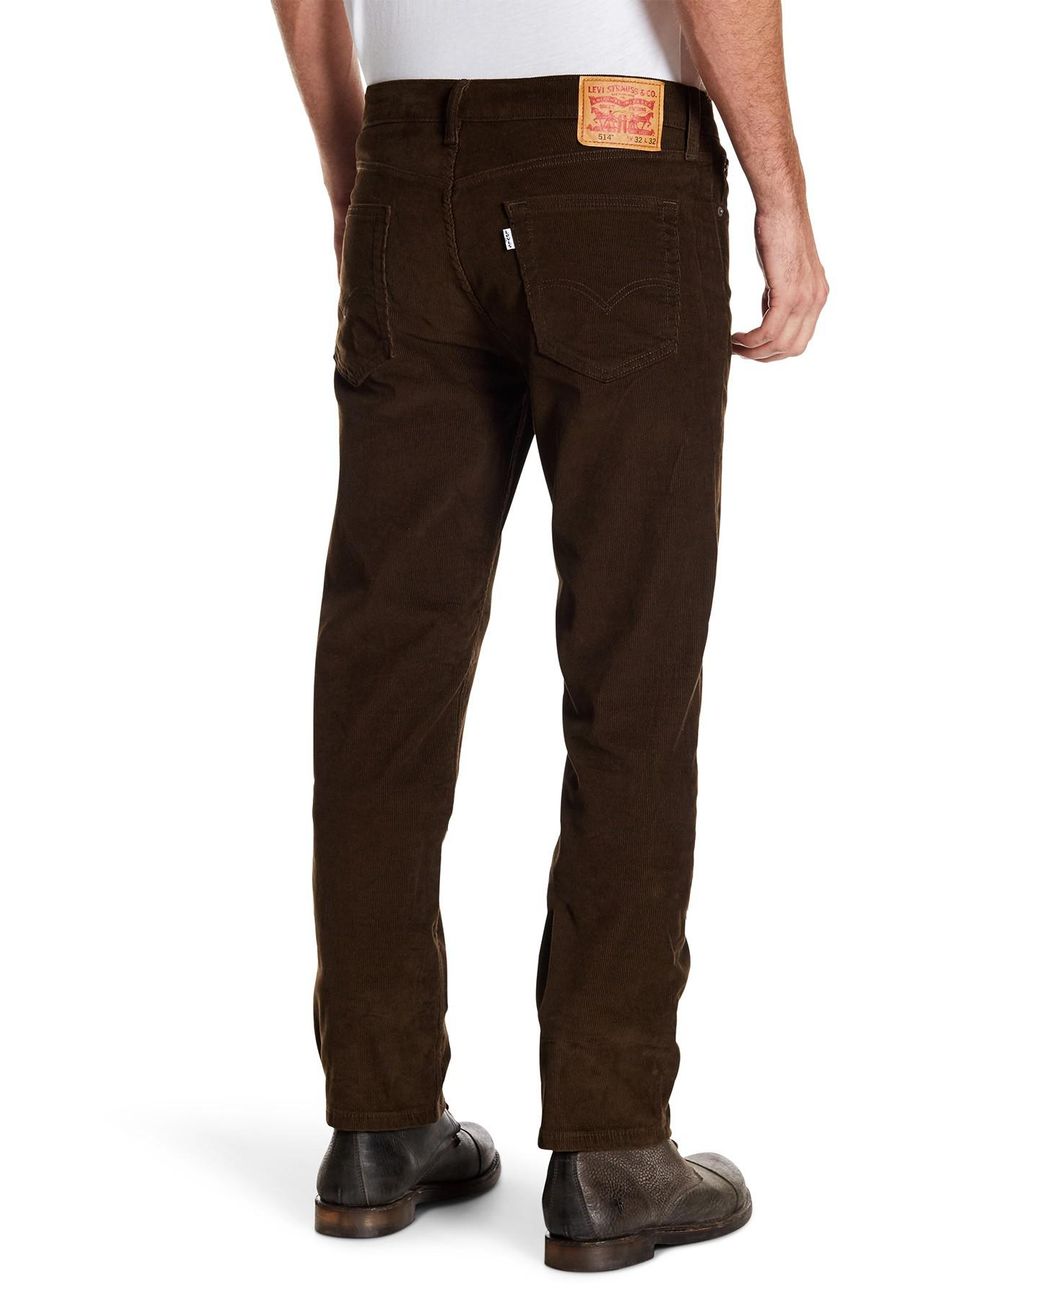 Levi's 514 Straight Fit Pant | peacecommission.kdsg.gov.ng